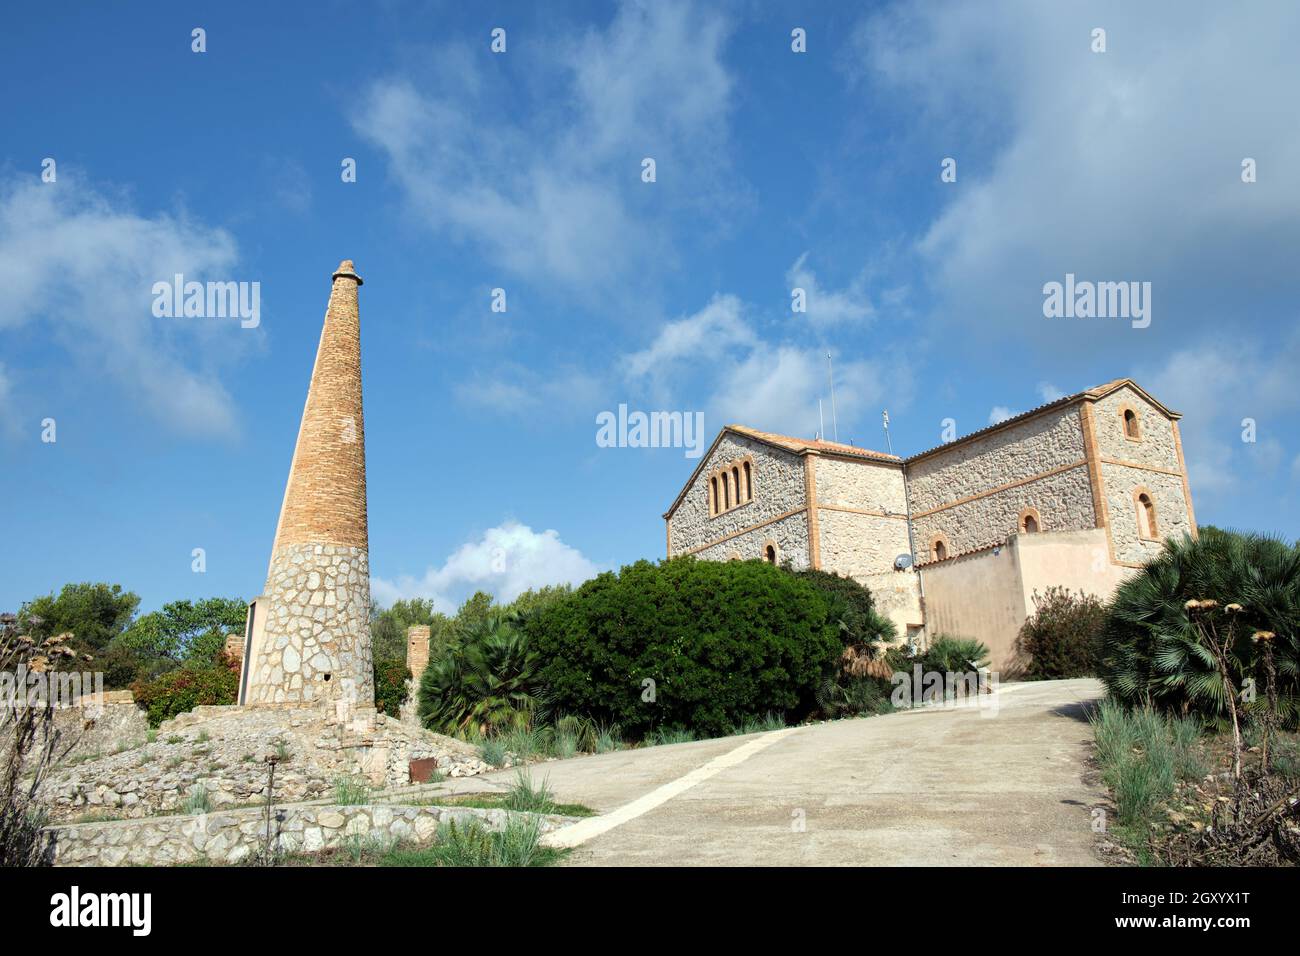 Typical Catalan architecture house built in stone and brick with a wall and hanging plants. Obelisk of the same construction material as the house. Stock Photo